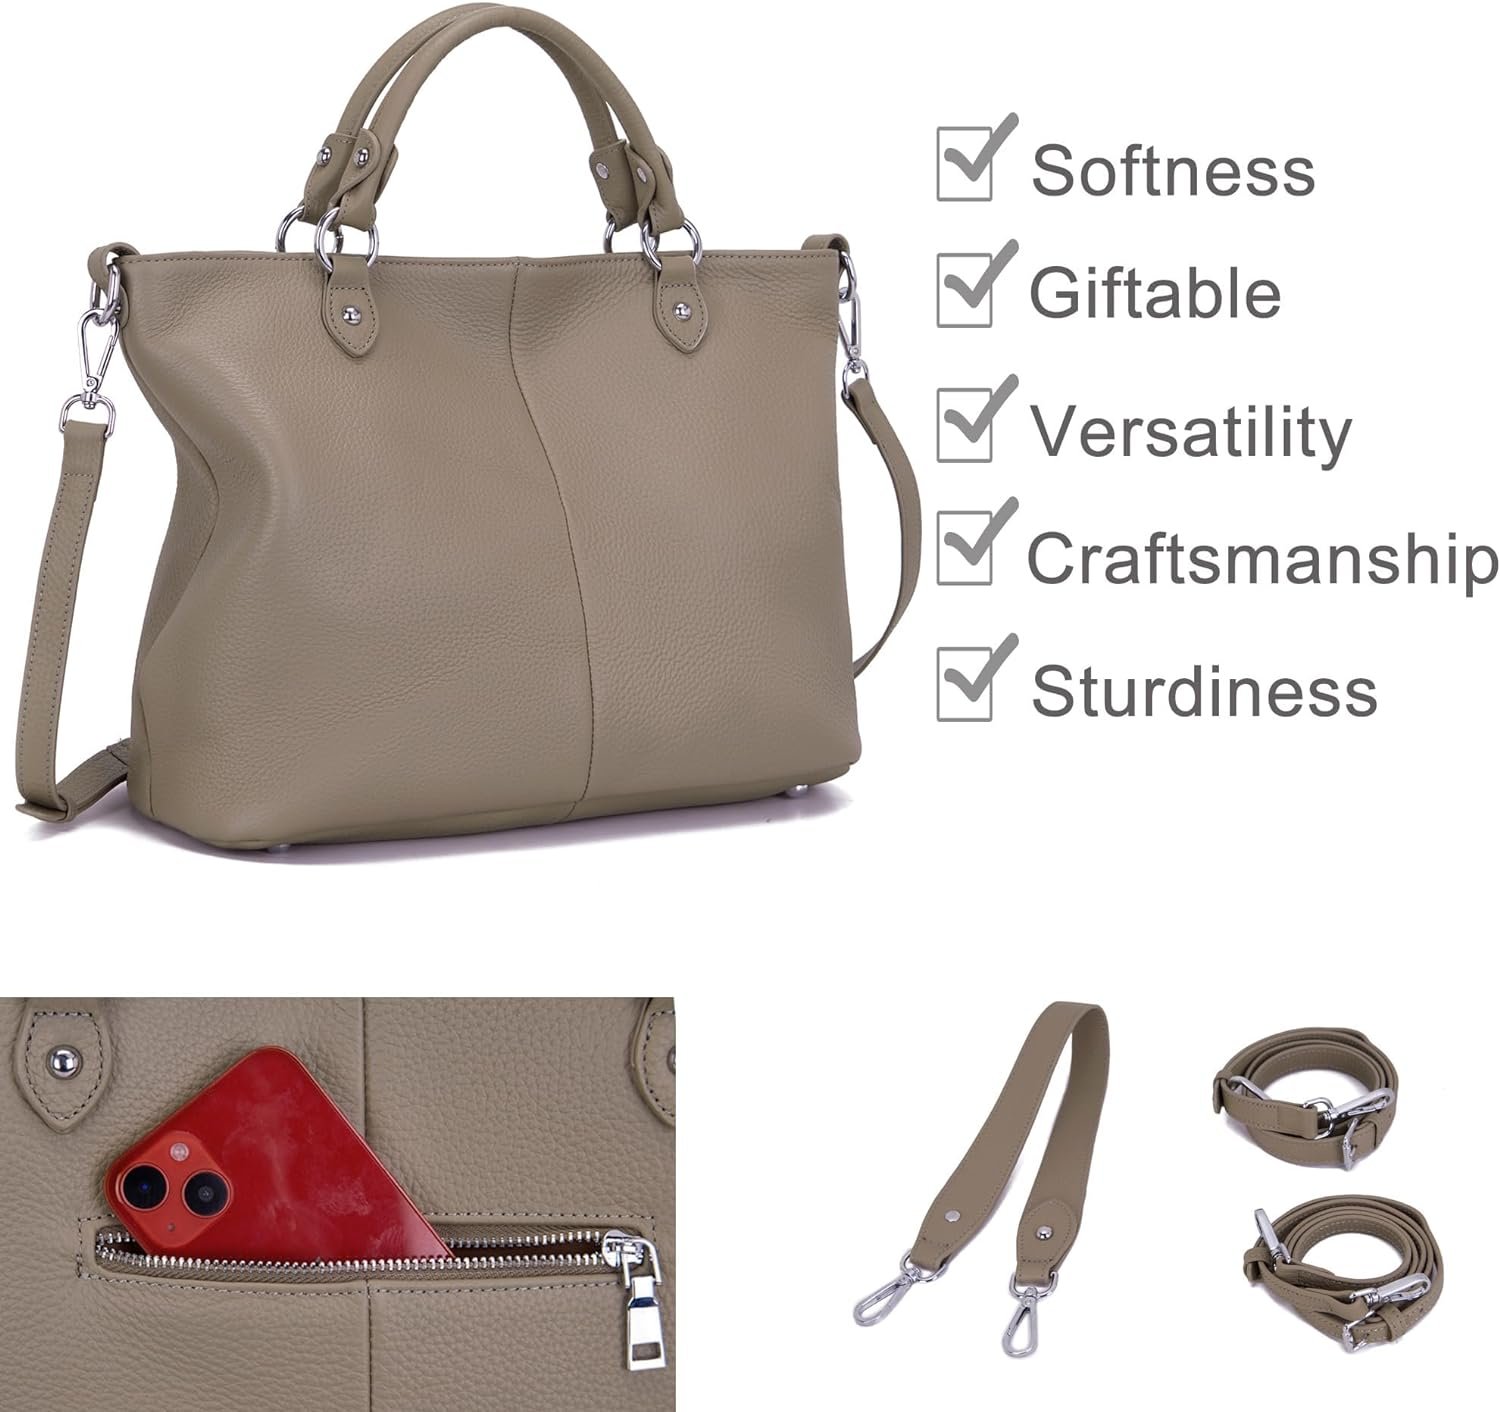 Real Leather Purses and Handbag Review